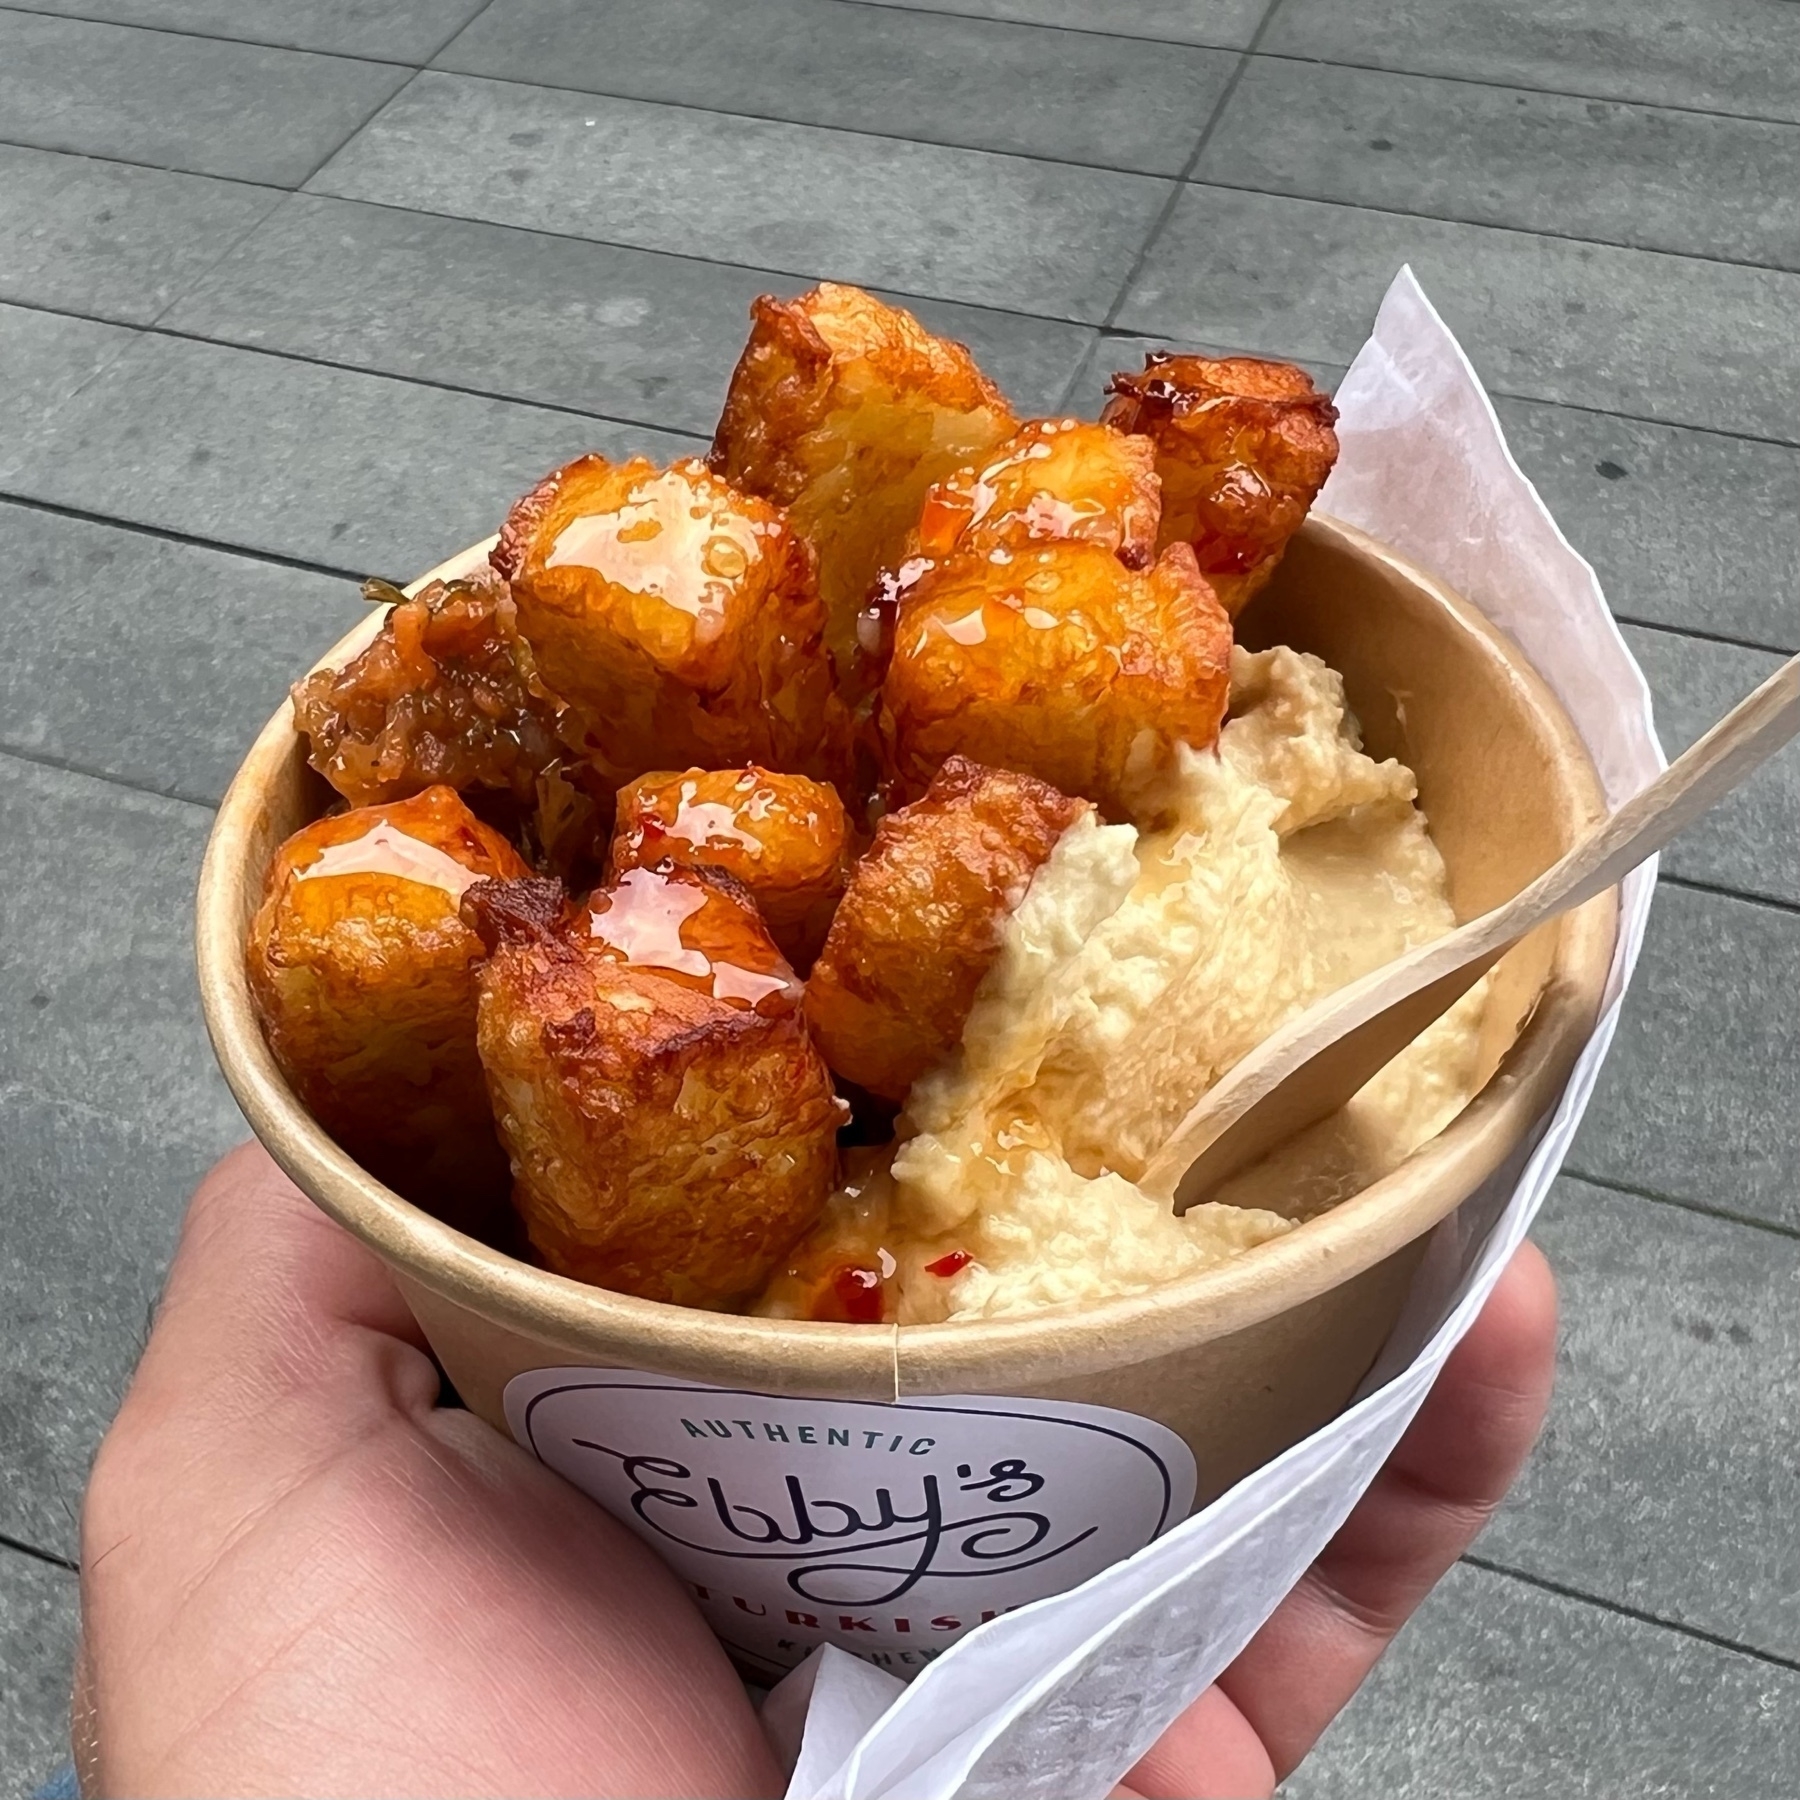 Cardboard cup filled with fried halloumi cheese with a side of hummus